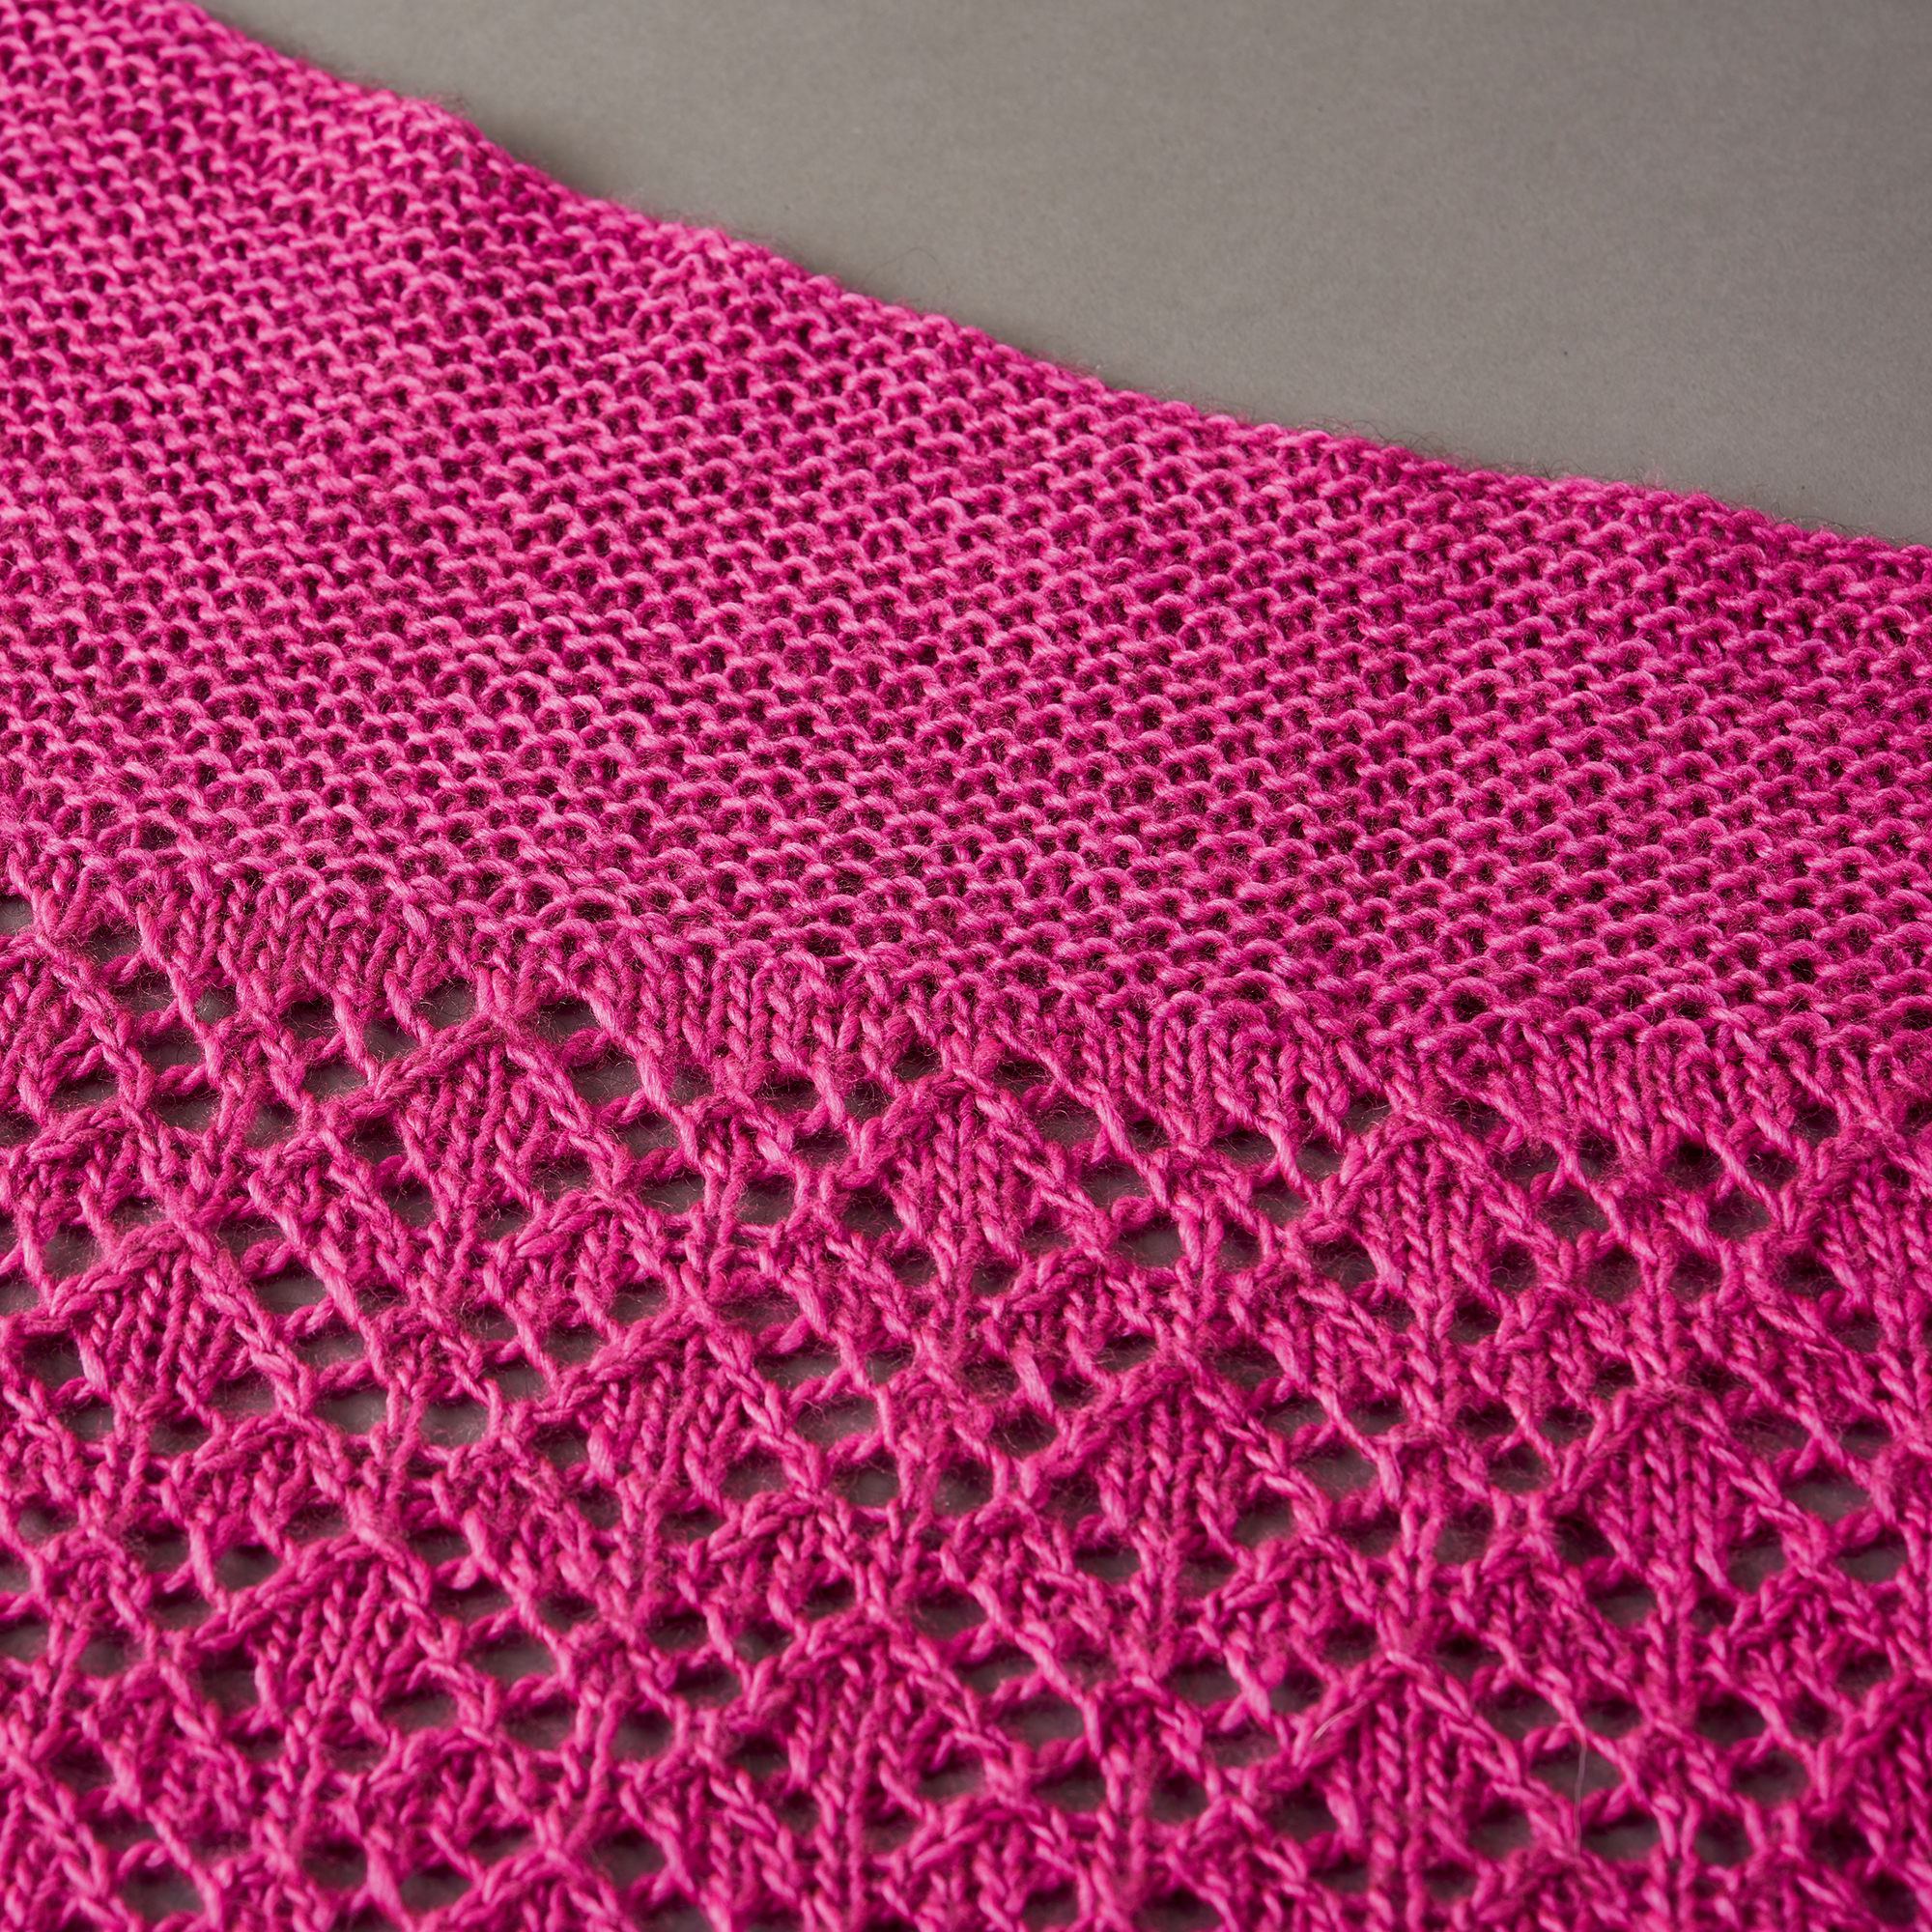 How to design a shawl - Gathered